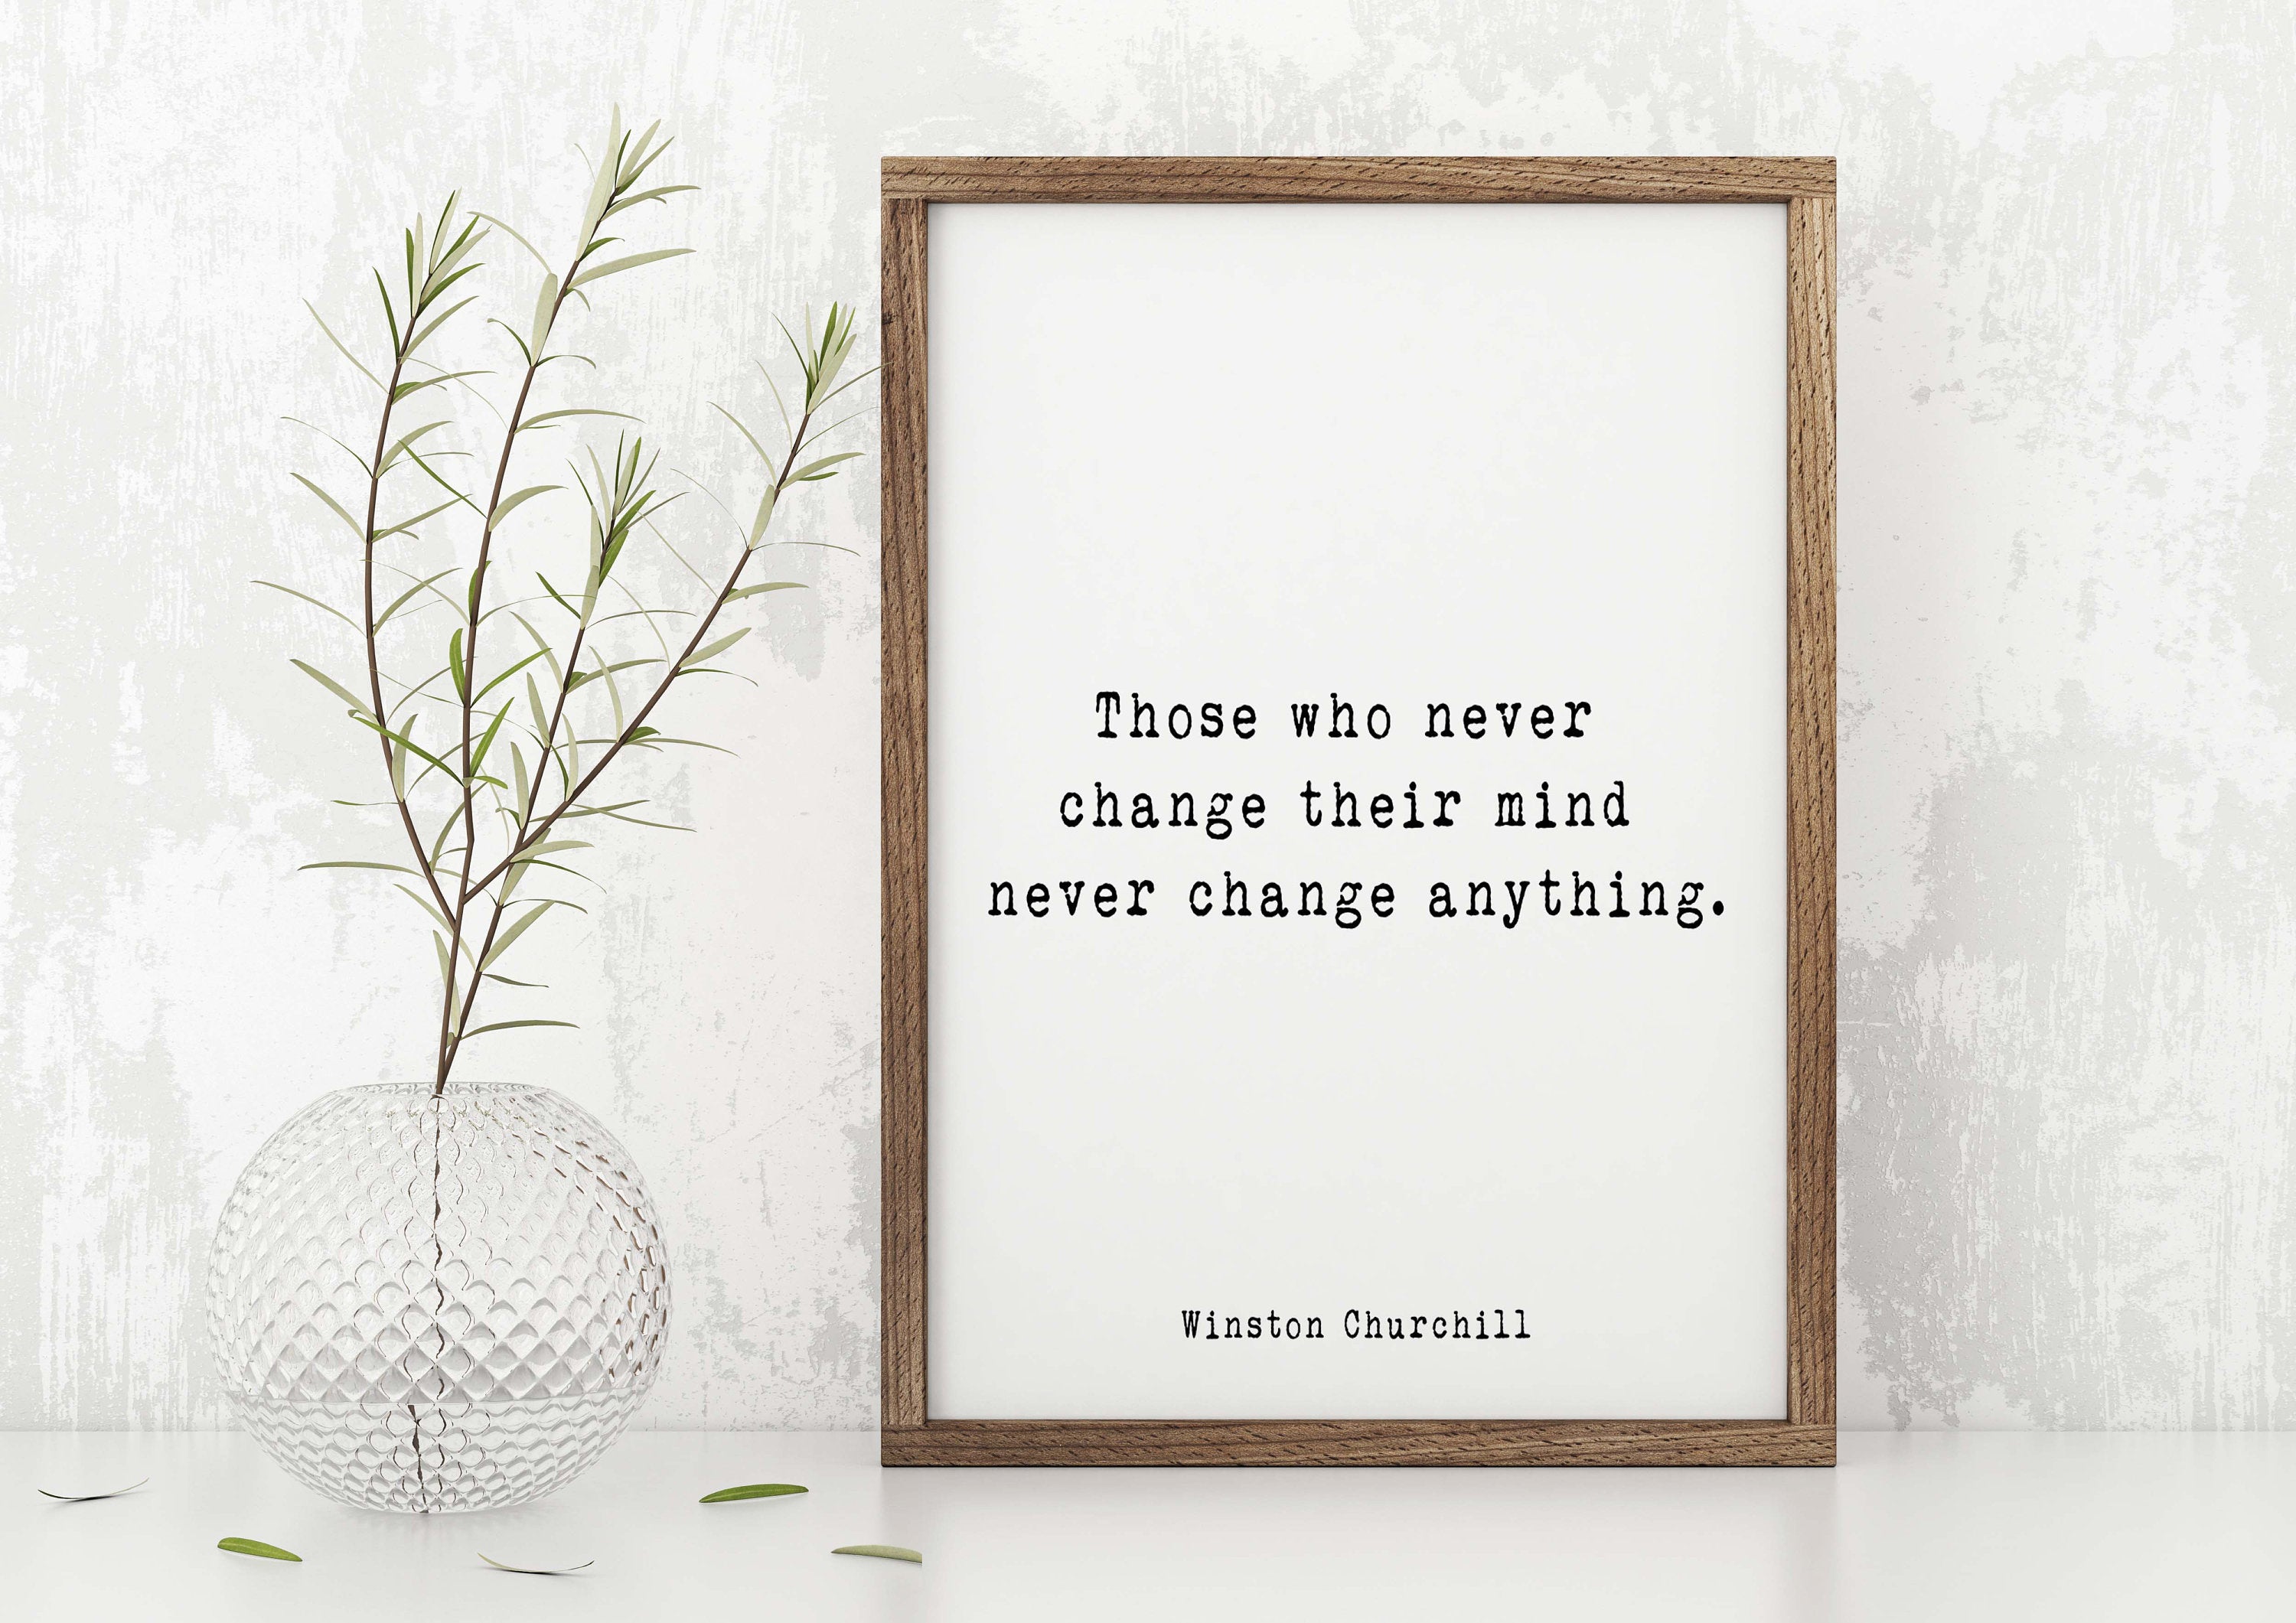 Winston Churchill  Quote Print, Those Who Never Change Their Mind Never Change Anything, Unframed Wall Art Prints - BookQuoteDecor